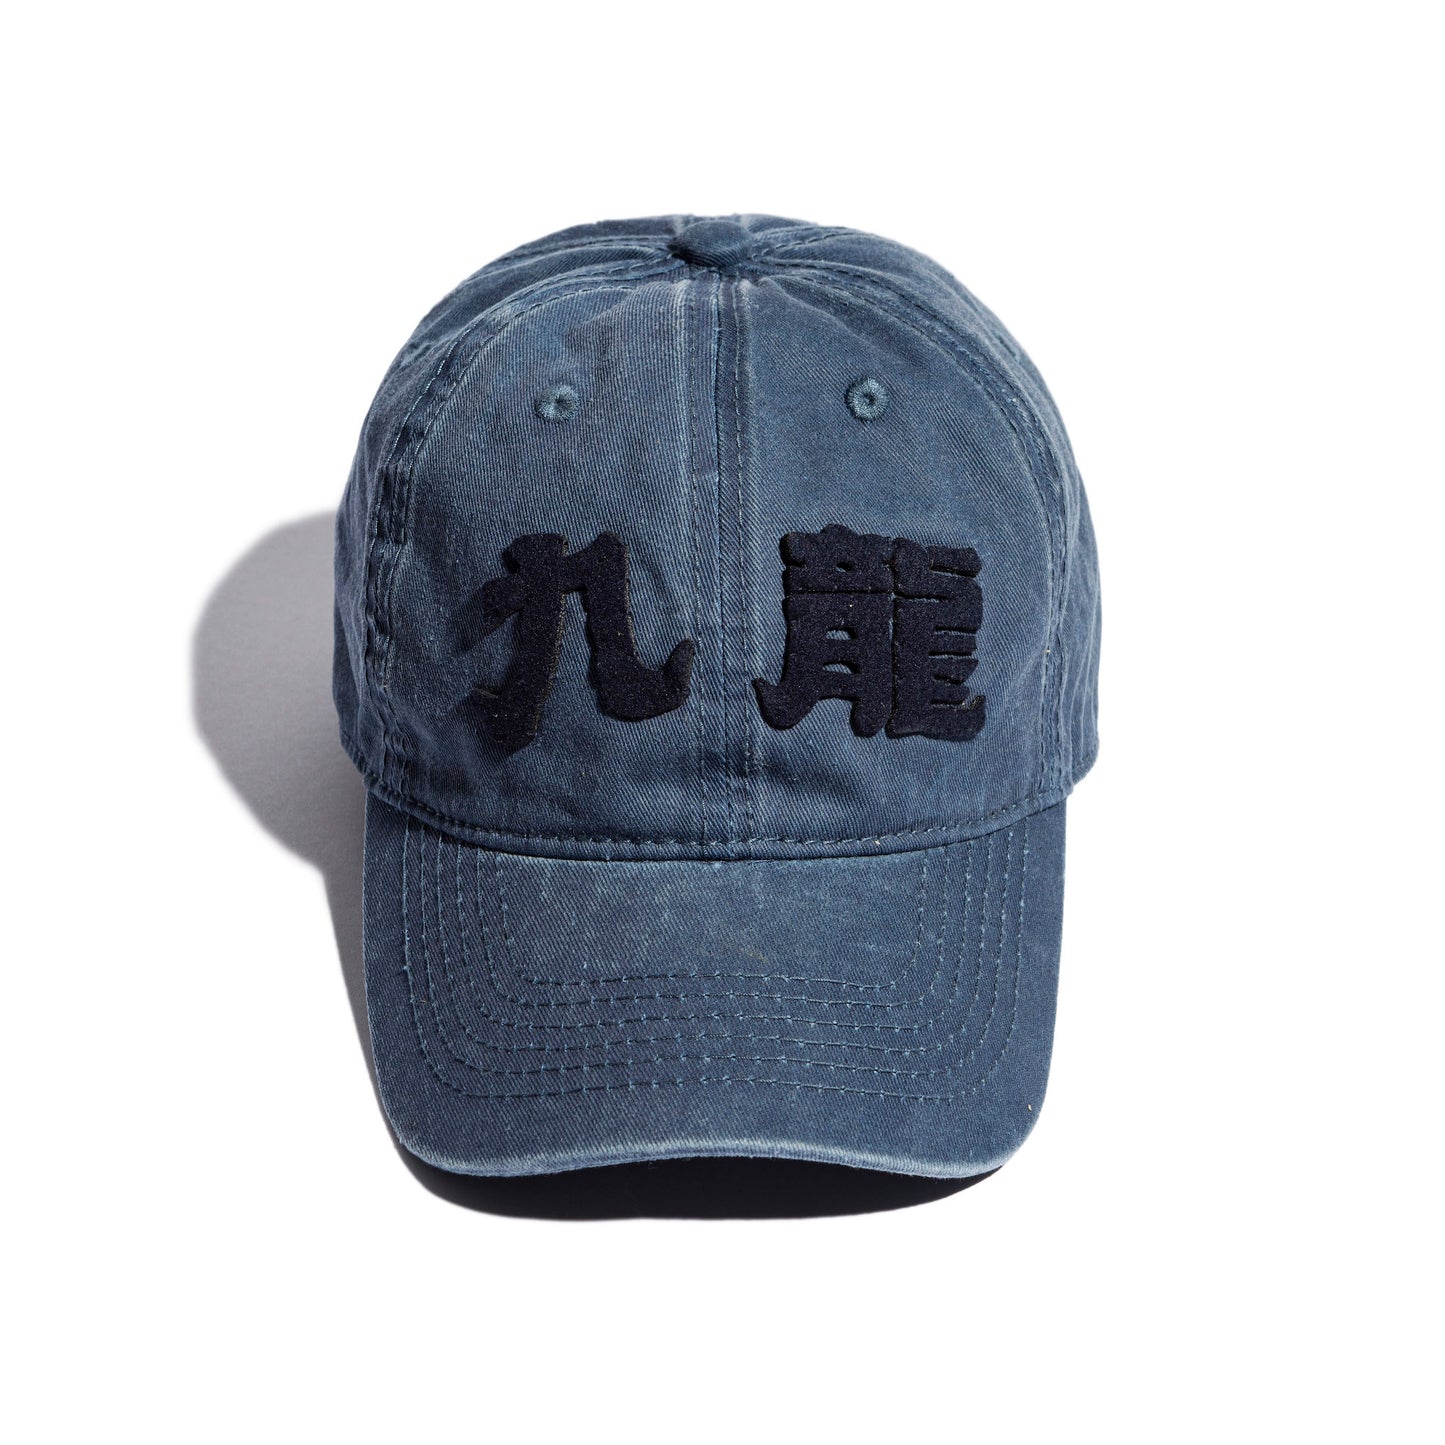 [PRE-ORDER SUMMER SPECIAL] FADED WASHED HAND QUILTED “KOWLOON” CAP / FADED NAVY